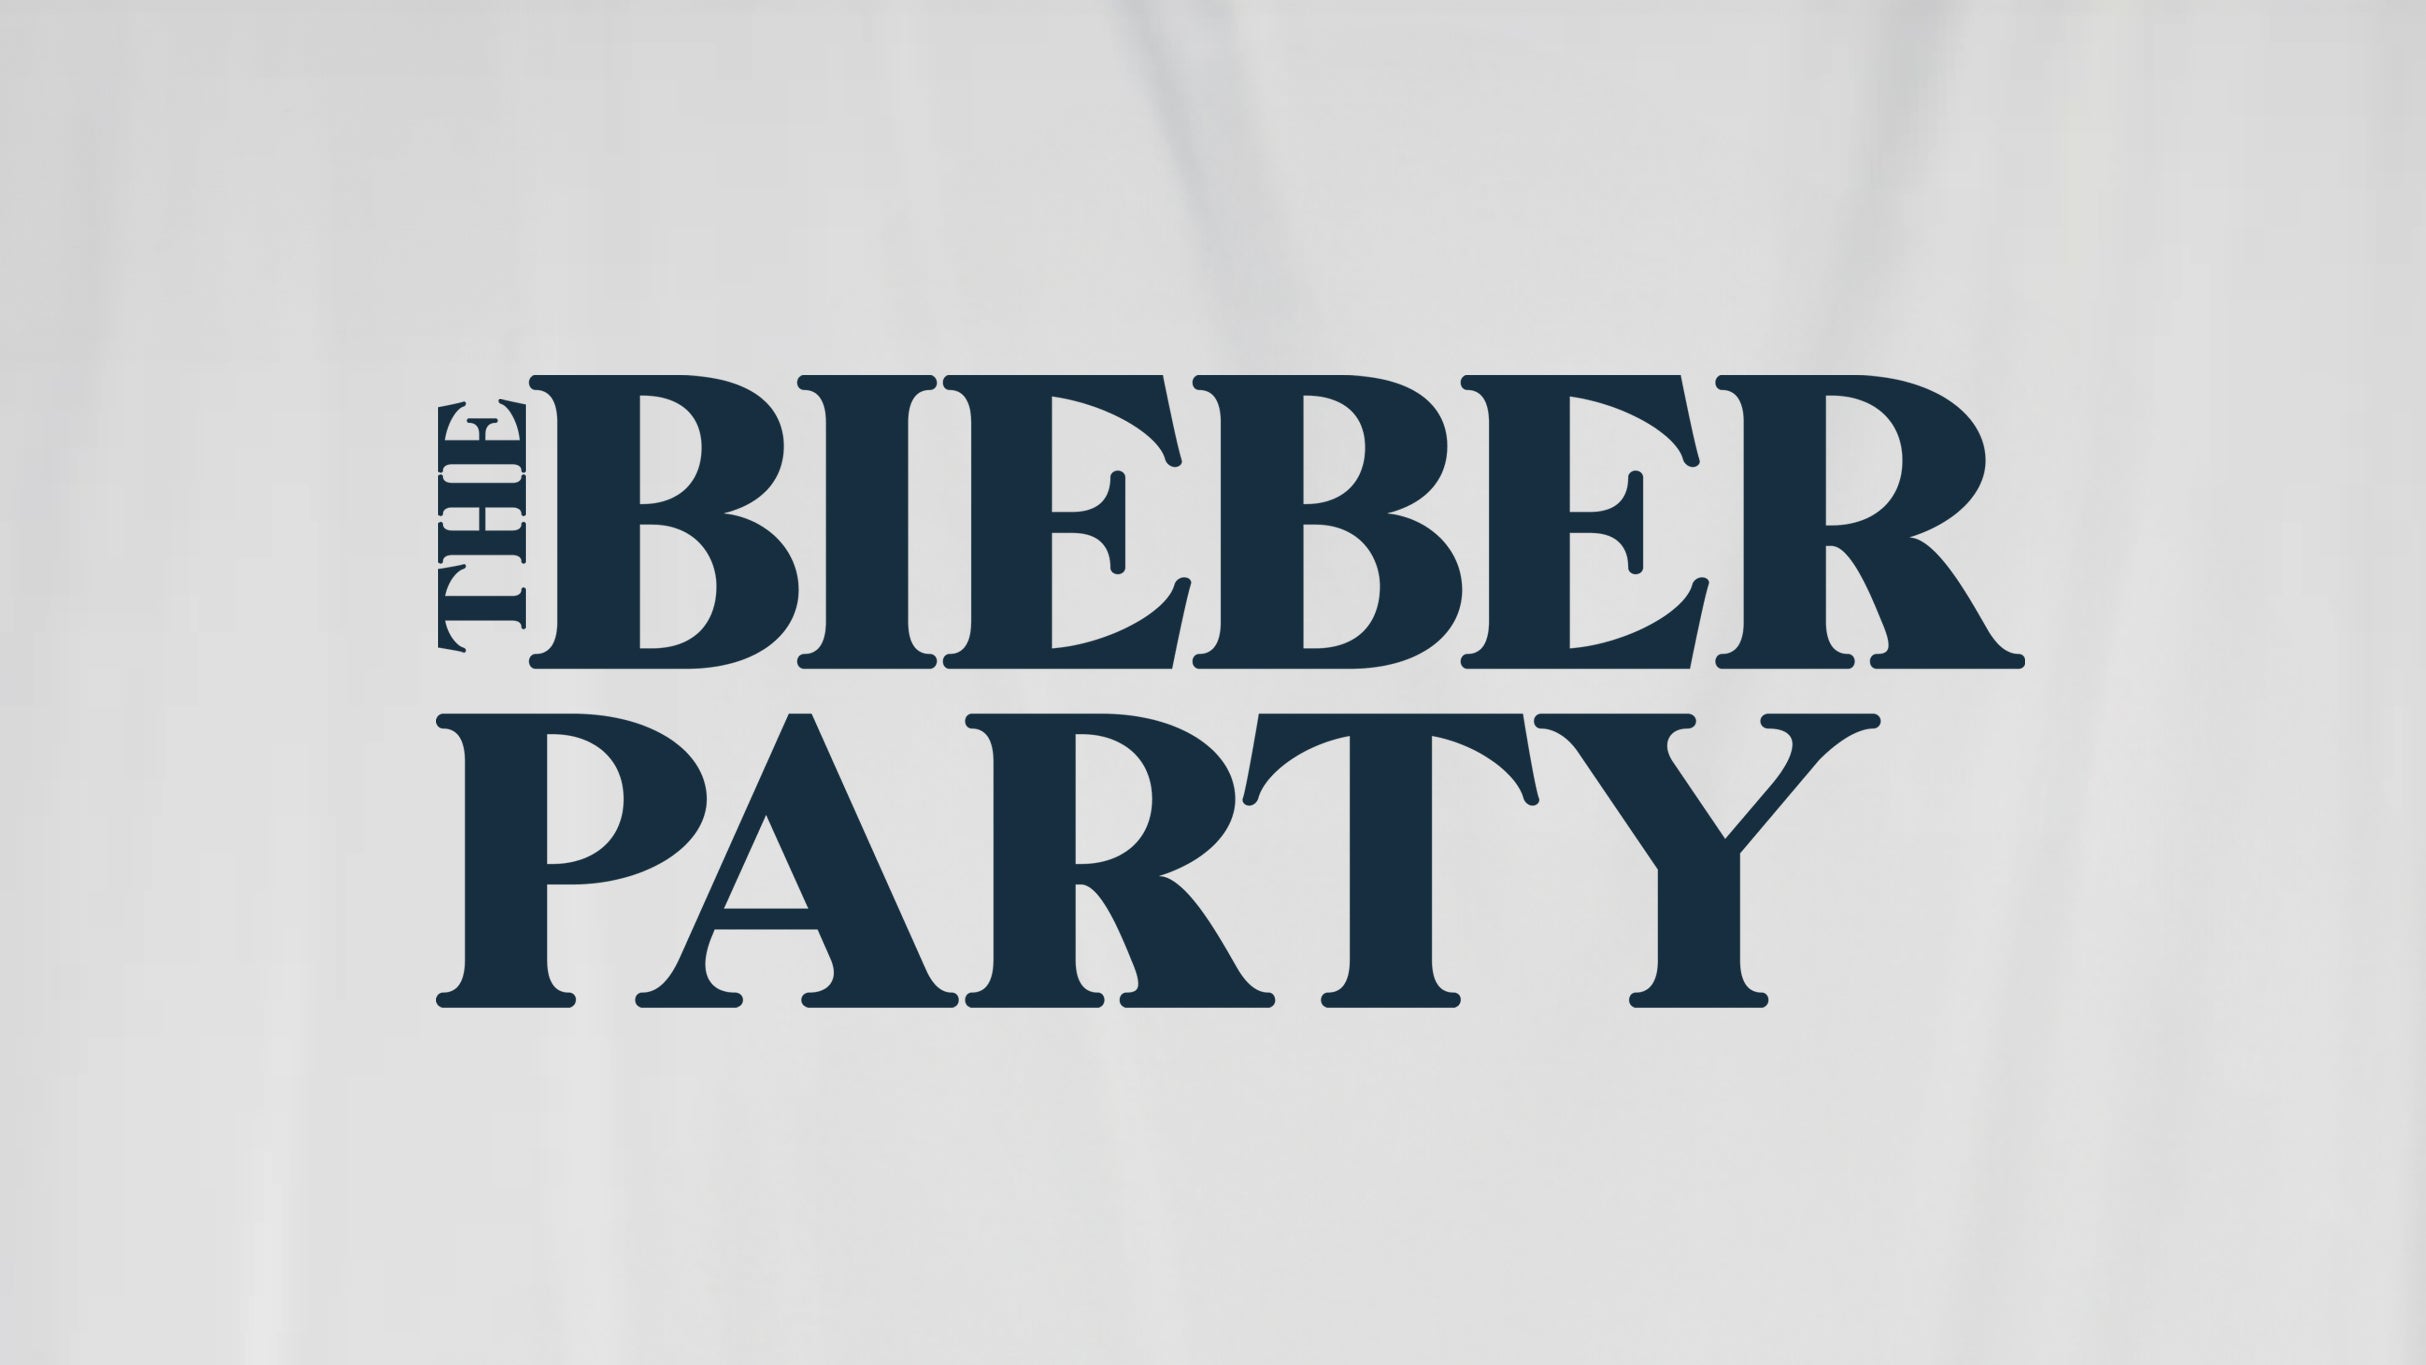 The Bieber Party: Justin Bieber Night (18+) in Wilmington promo photo for Belieber Club Exclusive Presale: presale offer code